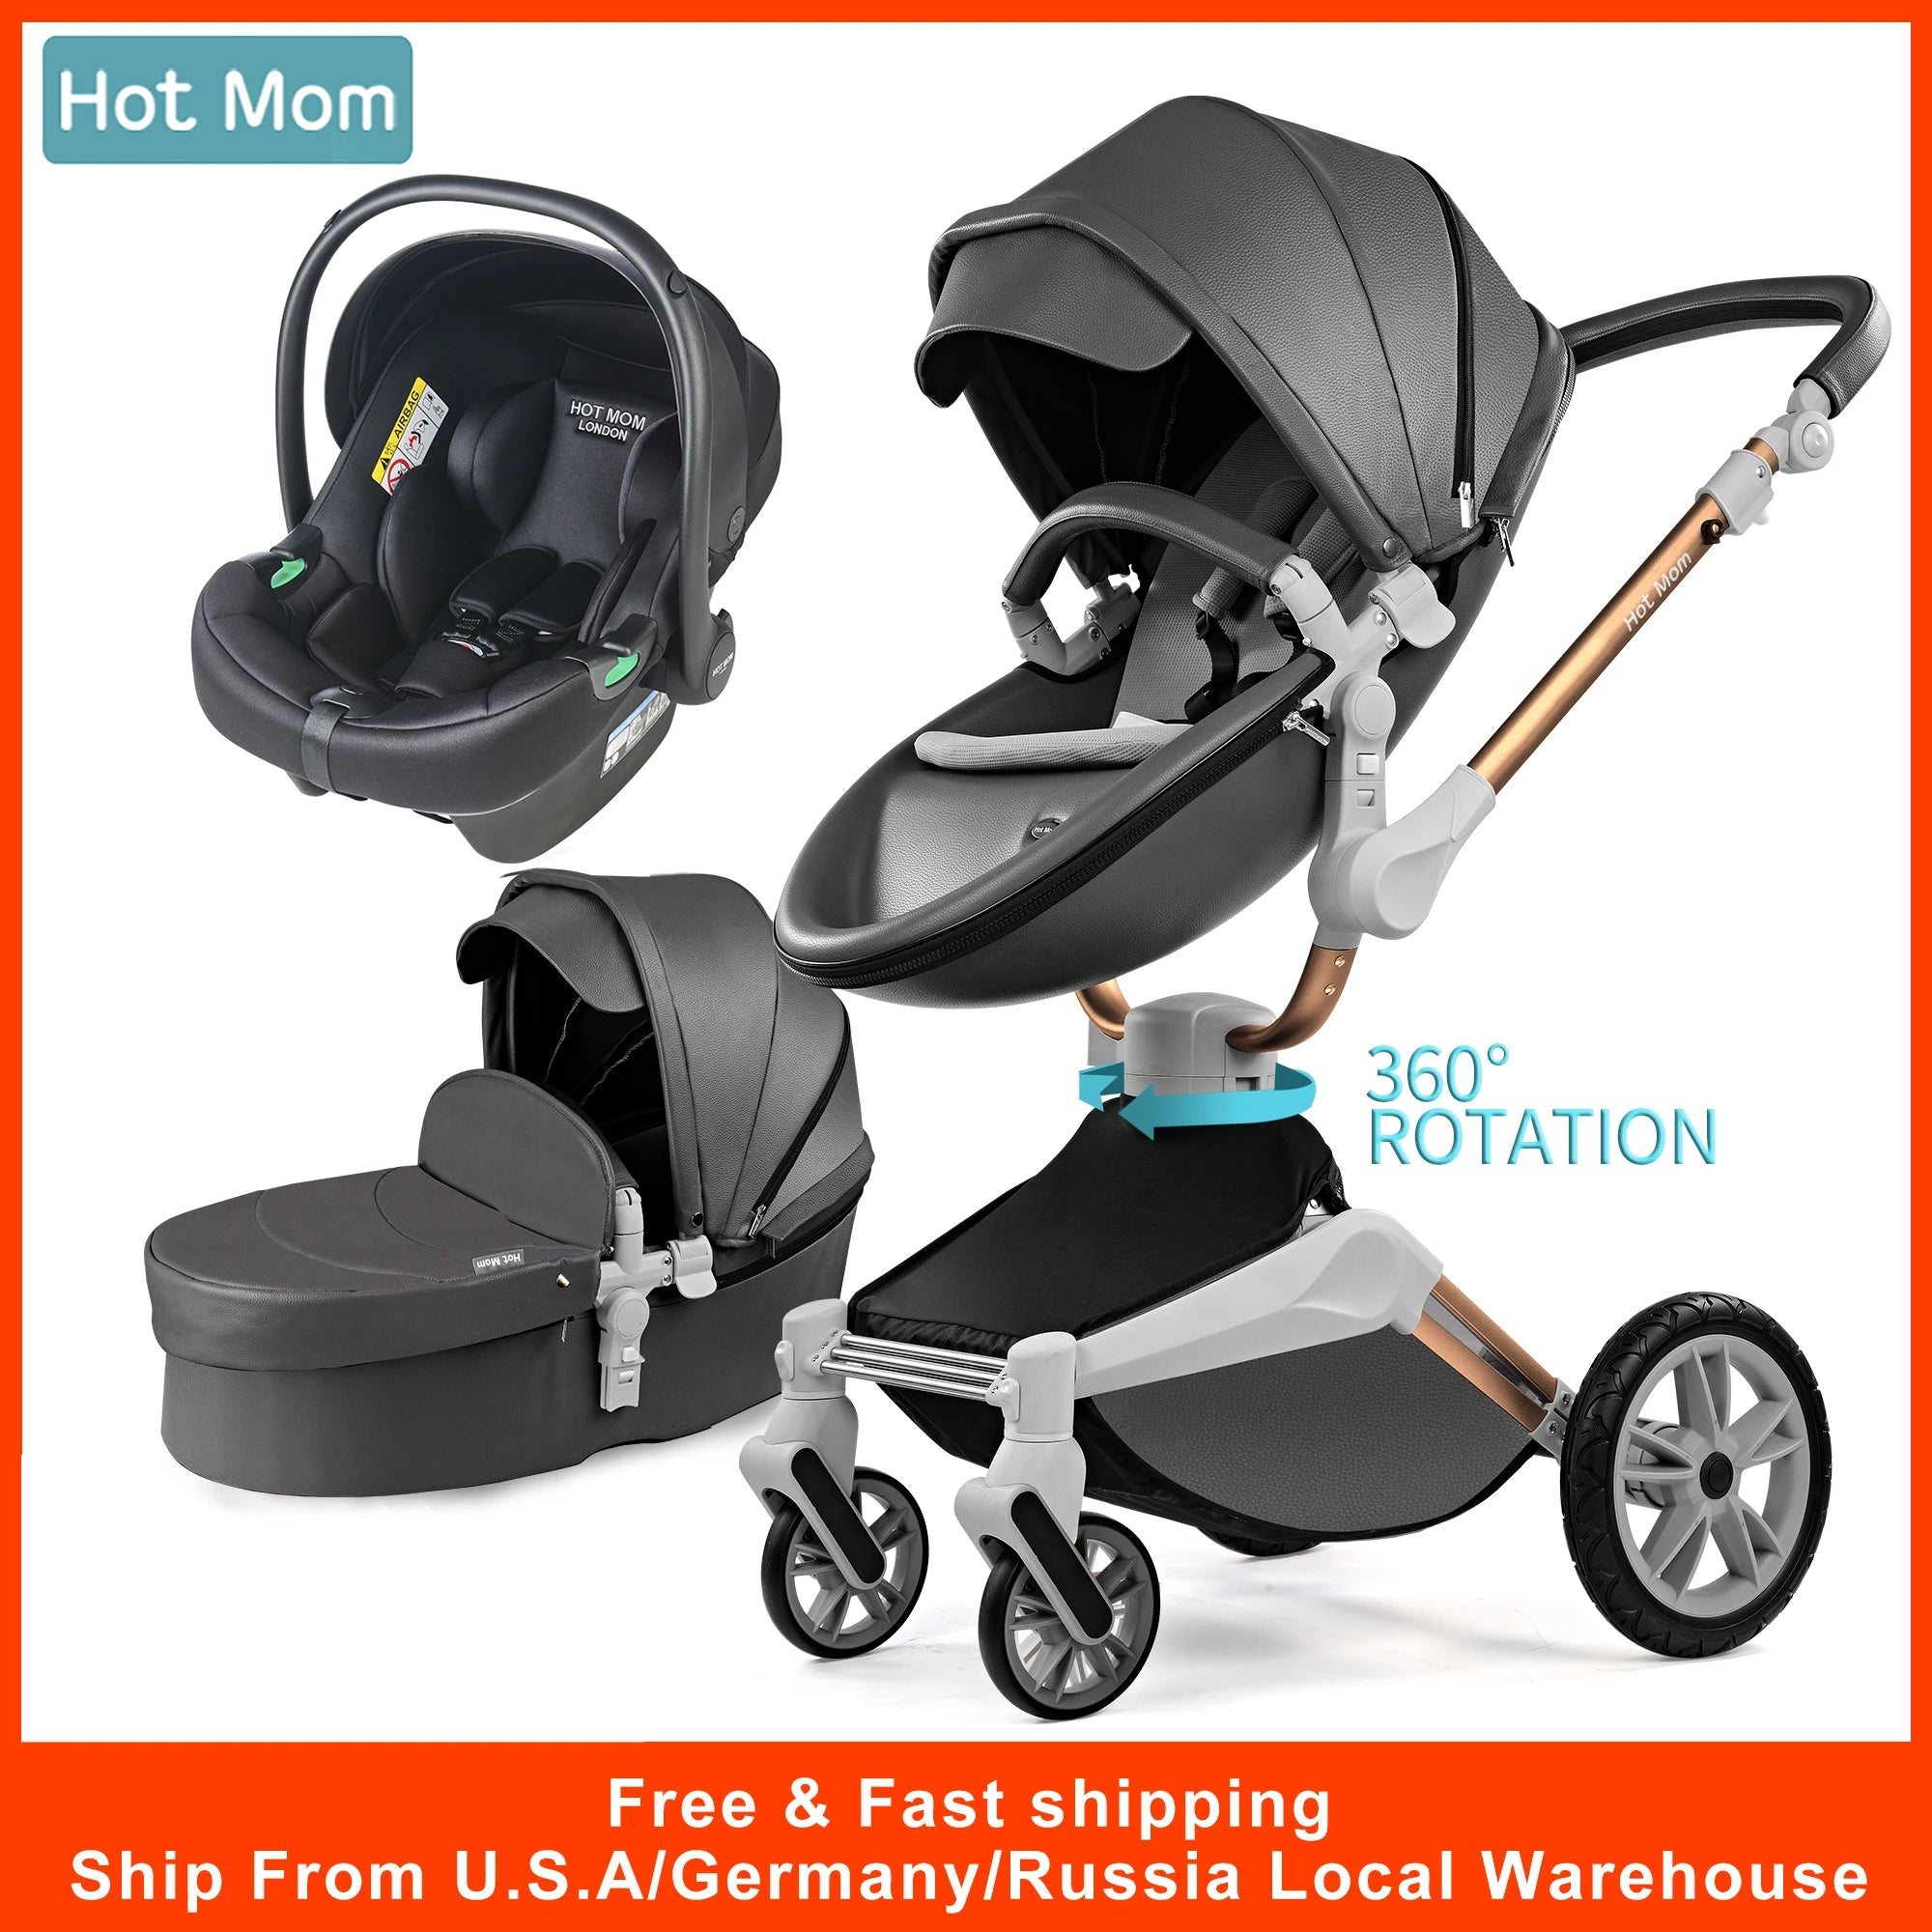 Hot Mom F023 Baby Stroller 3 in 1,Rotates 360 Degrees,PU Leather, Mosquito Net, Rain Cover, Adapter, Cup Holder, large wheels